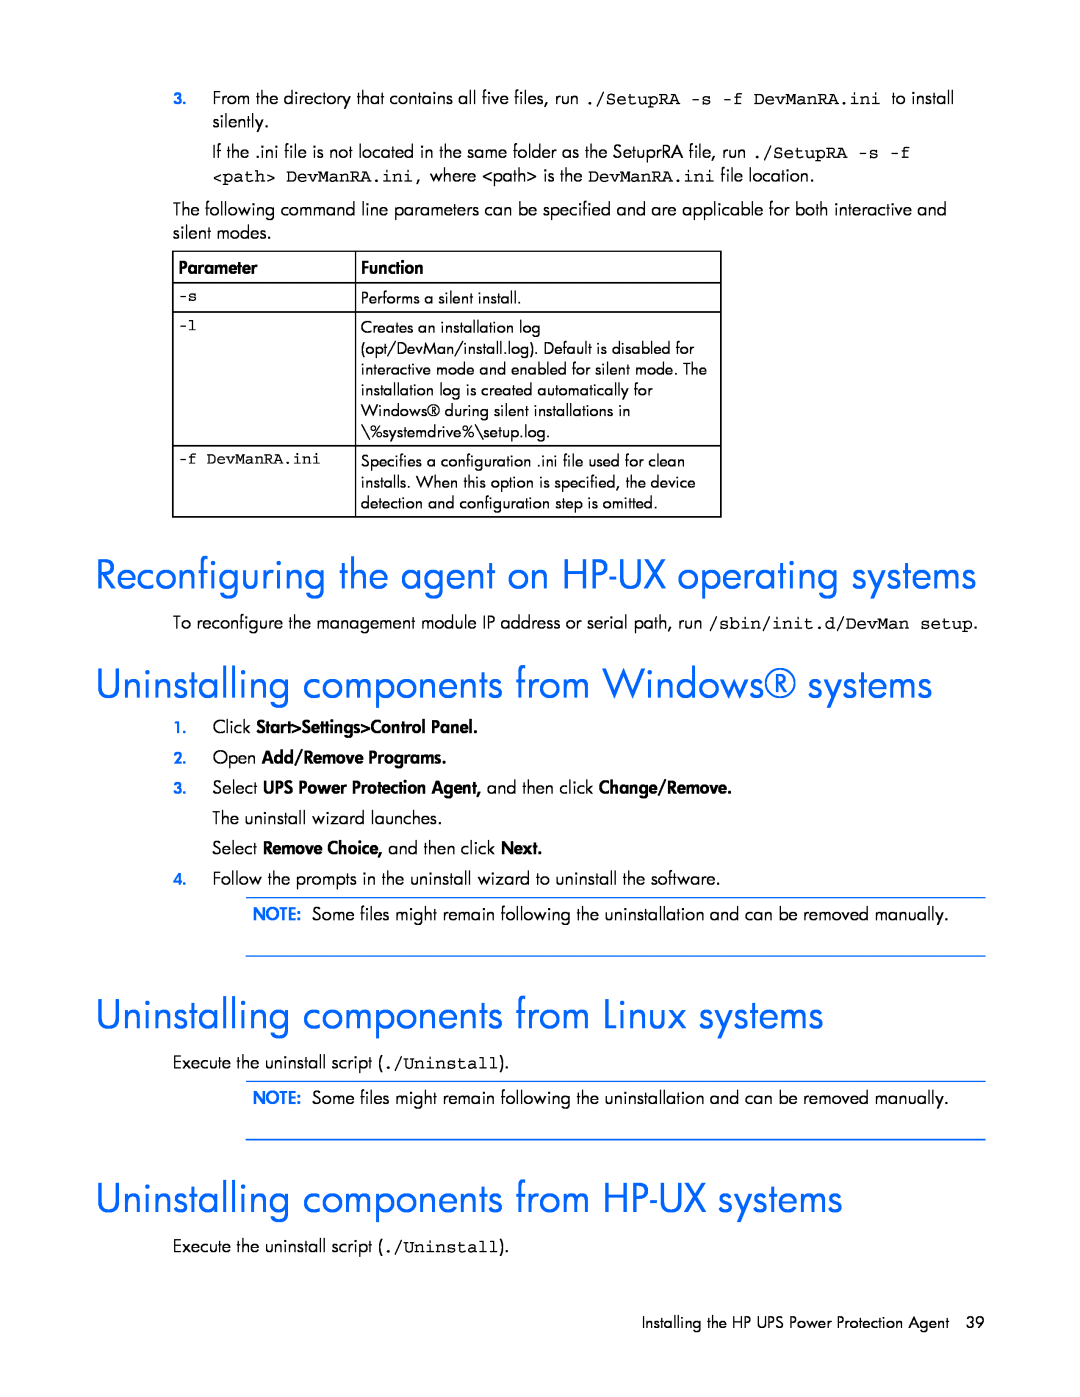 HP J4373A, A6584A, A1354A Reconfiguring the agent on HP-UX operating systems, Uninstalling components from Windows systems 